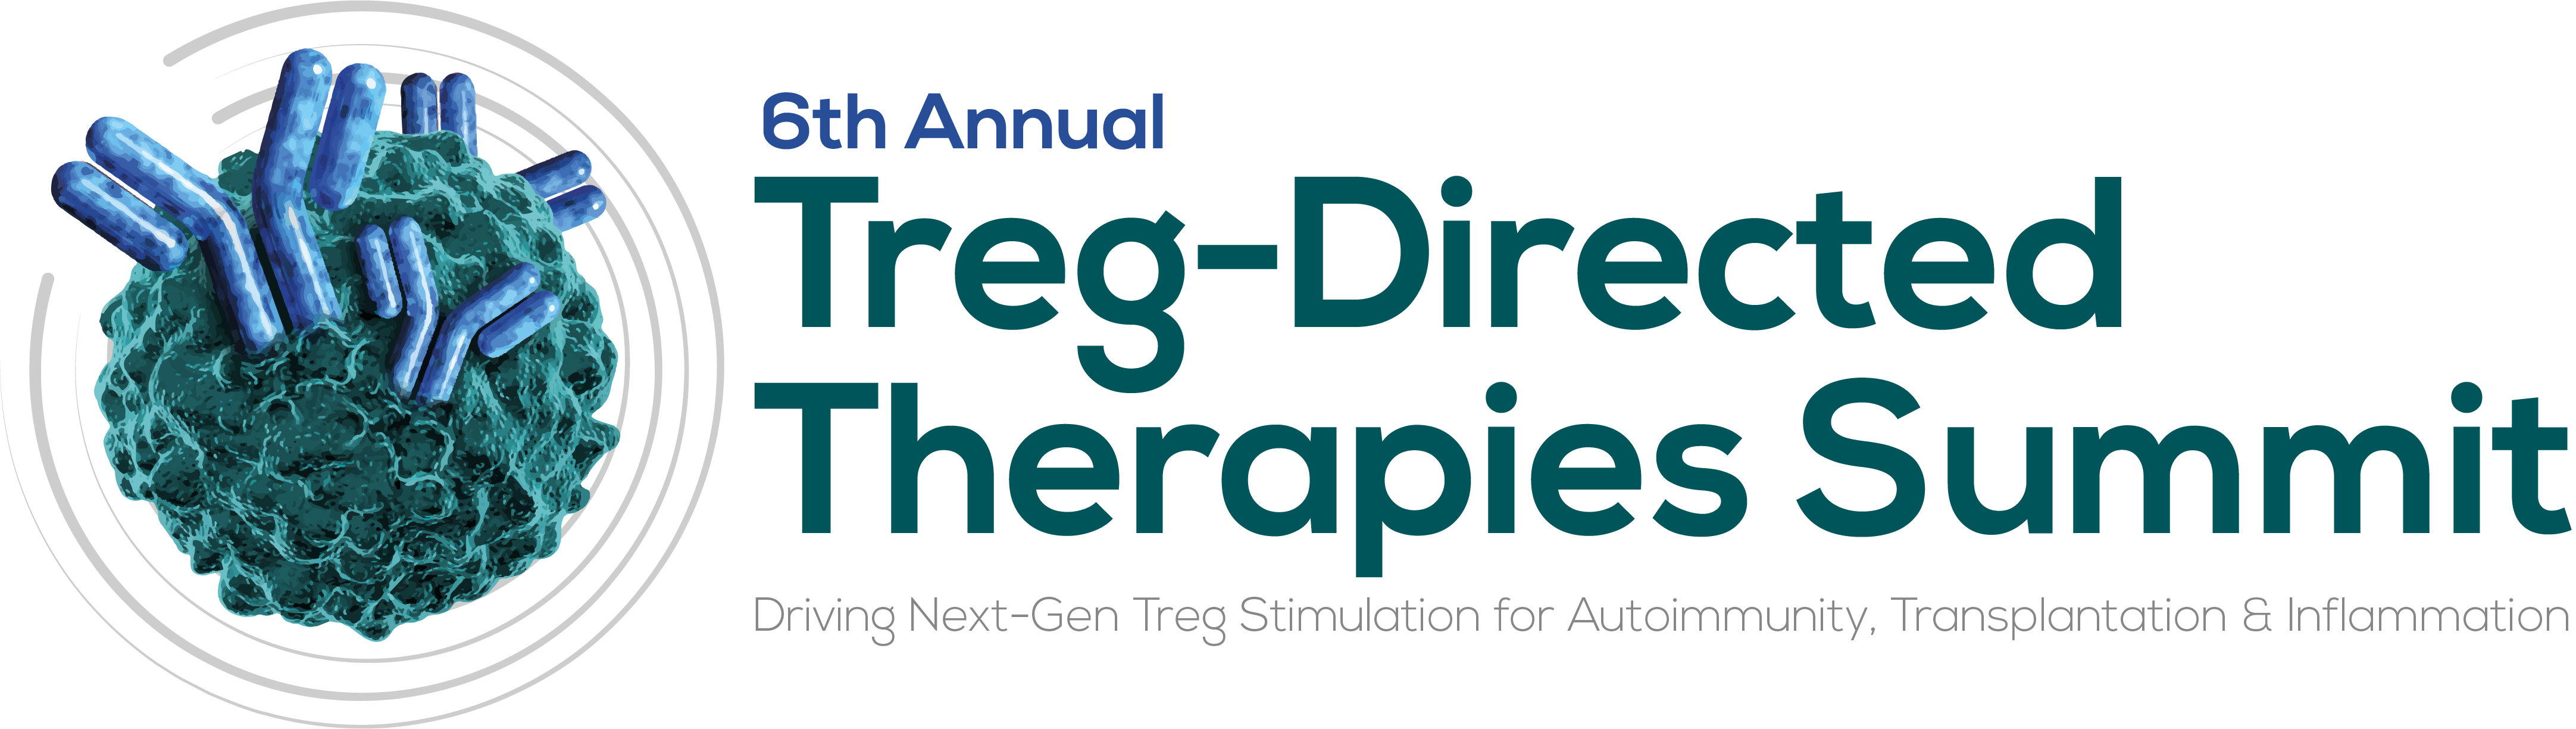 6th Annual Treg-Directed Therapies Summit